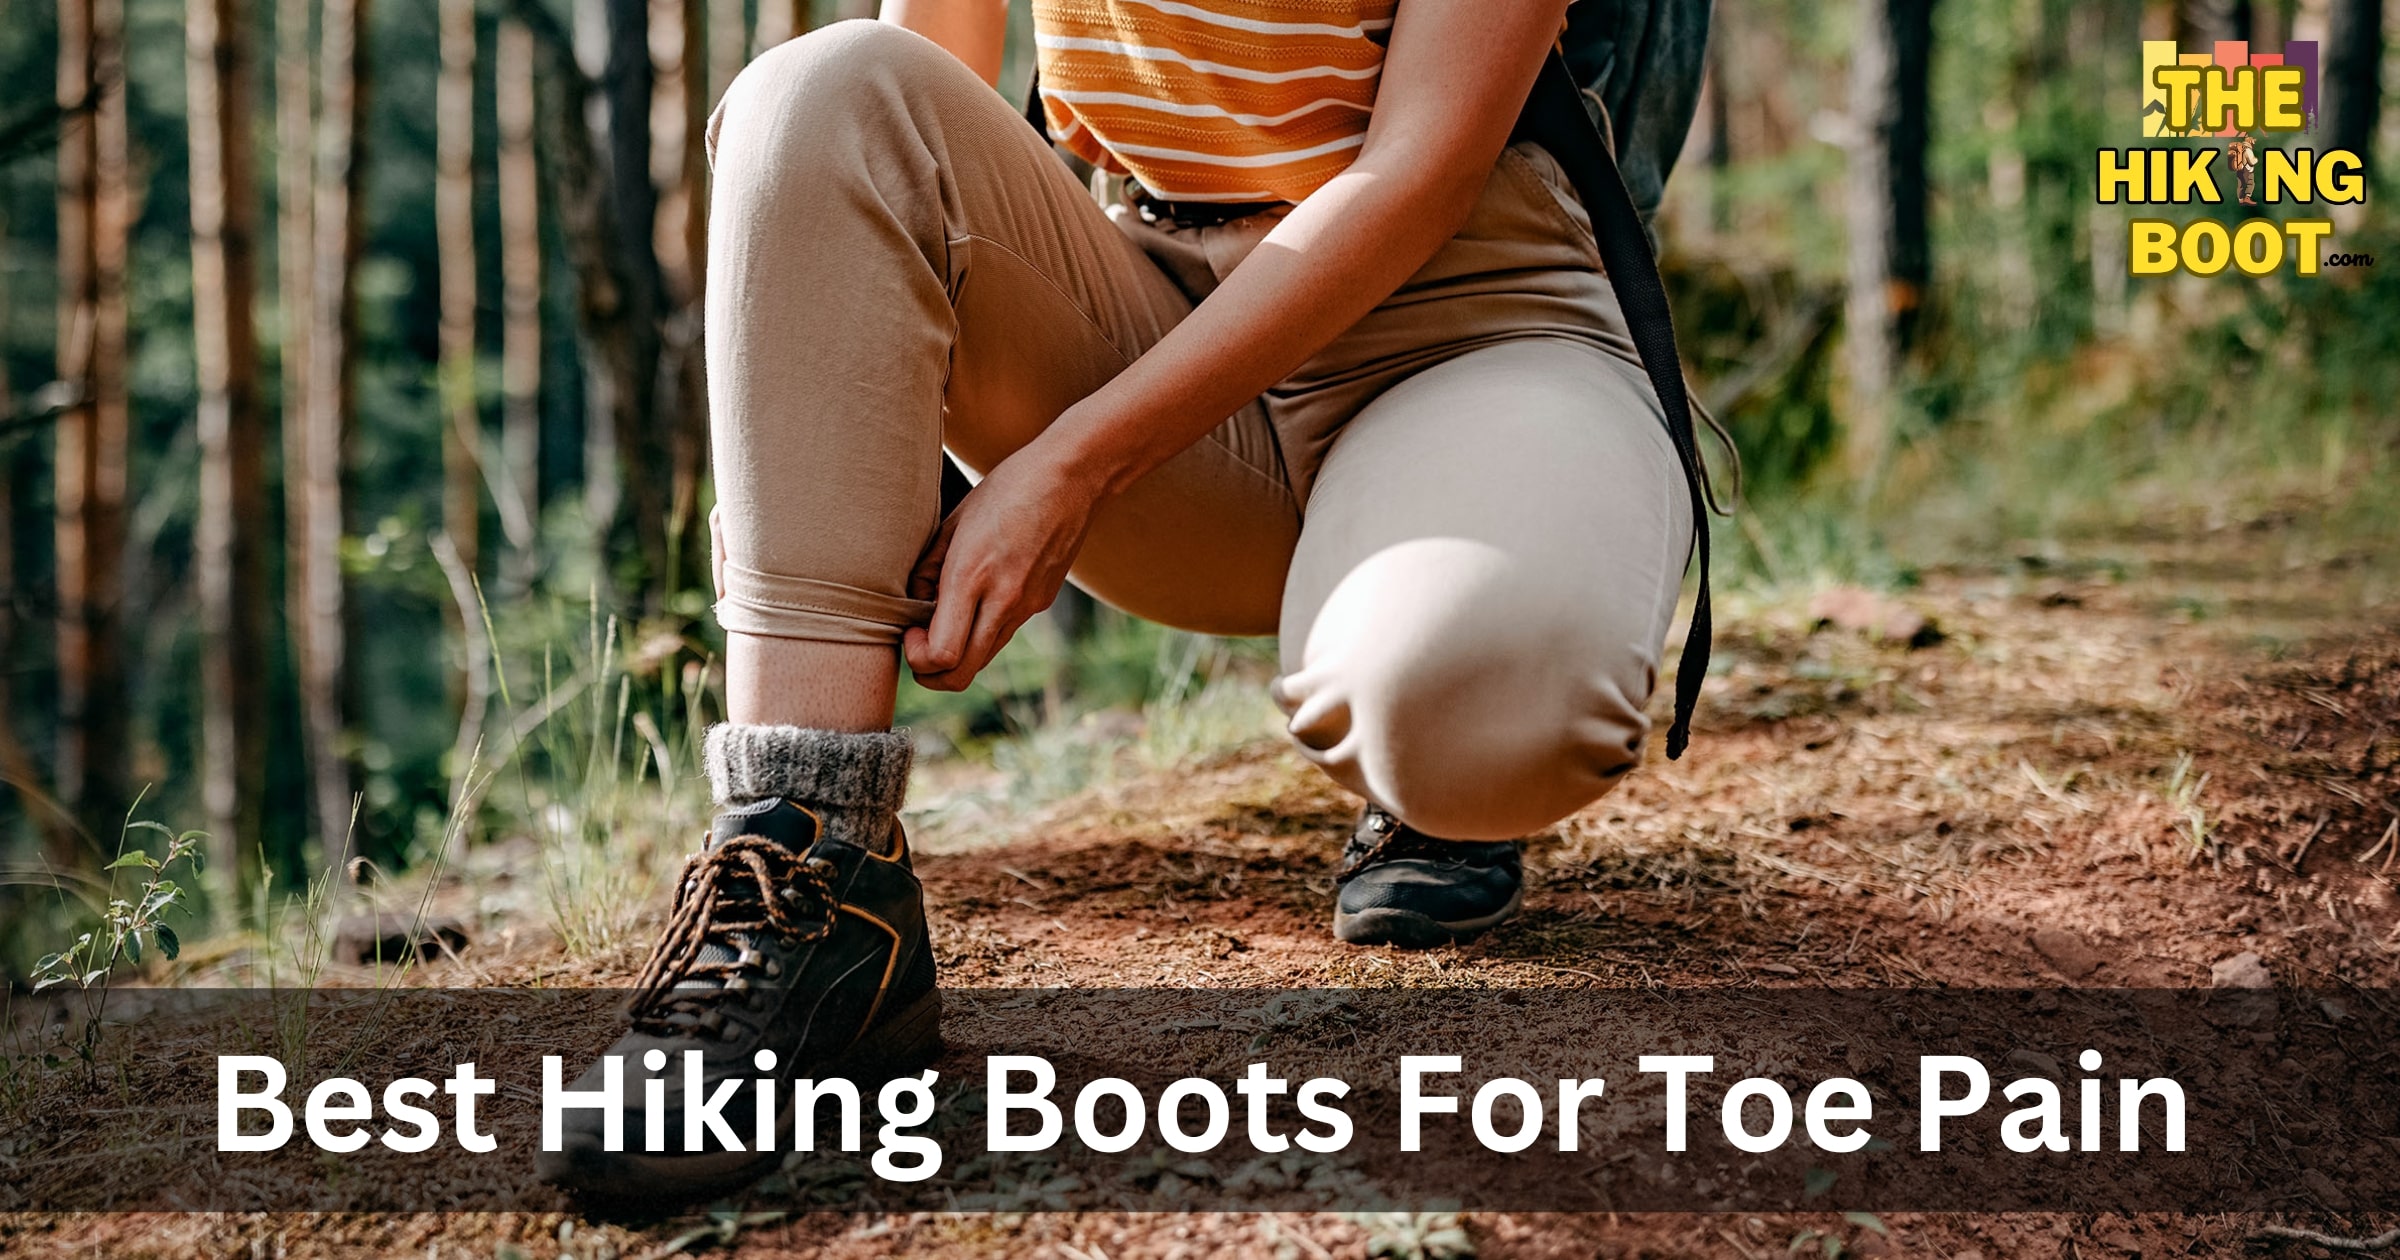 Best Hiking Boots For Toe Pain | Top 10 Best Boots For Toe Pain